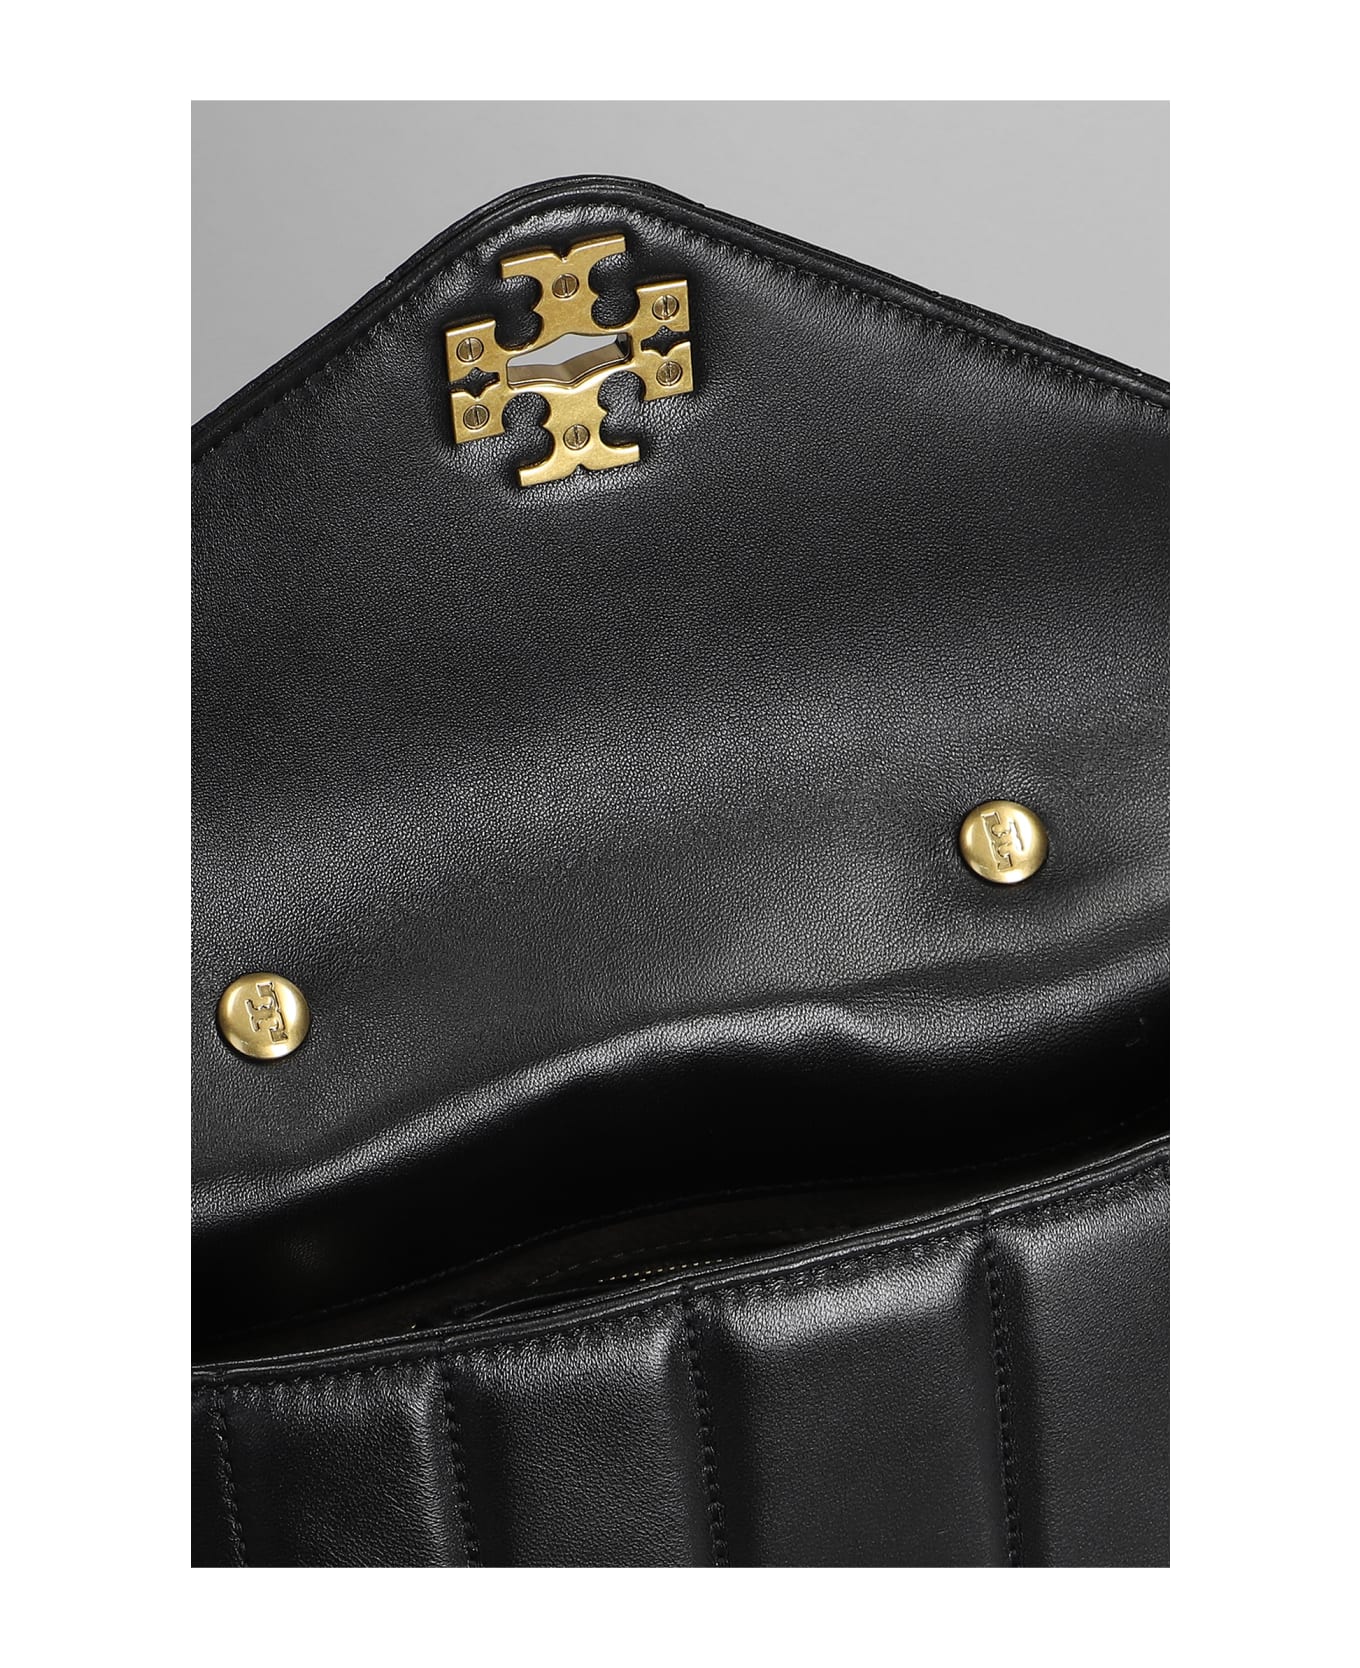 Tory Burch Hand Bag In Black Leather - black